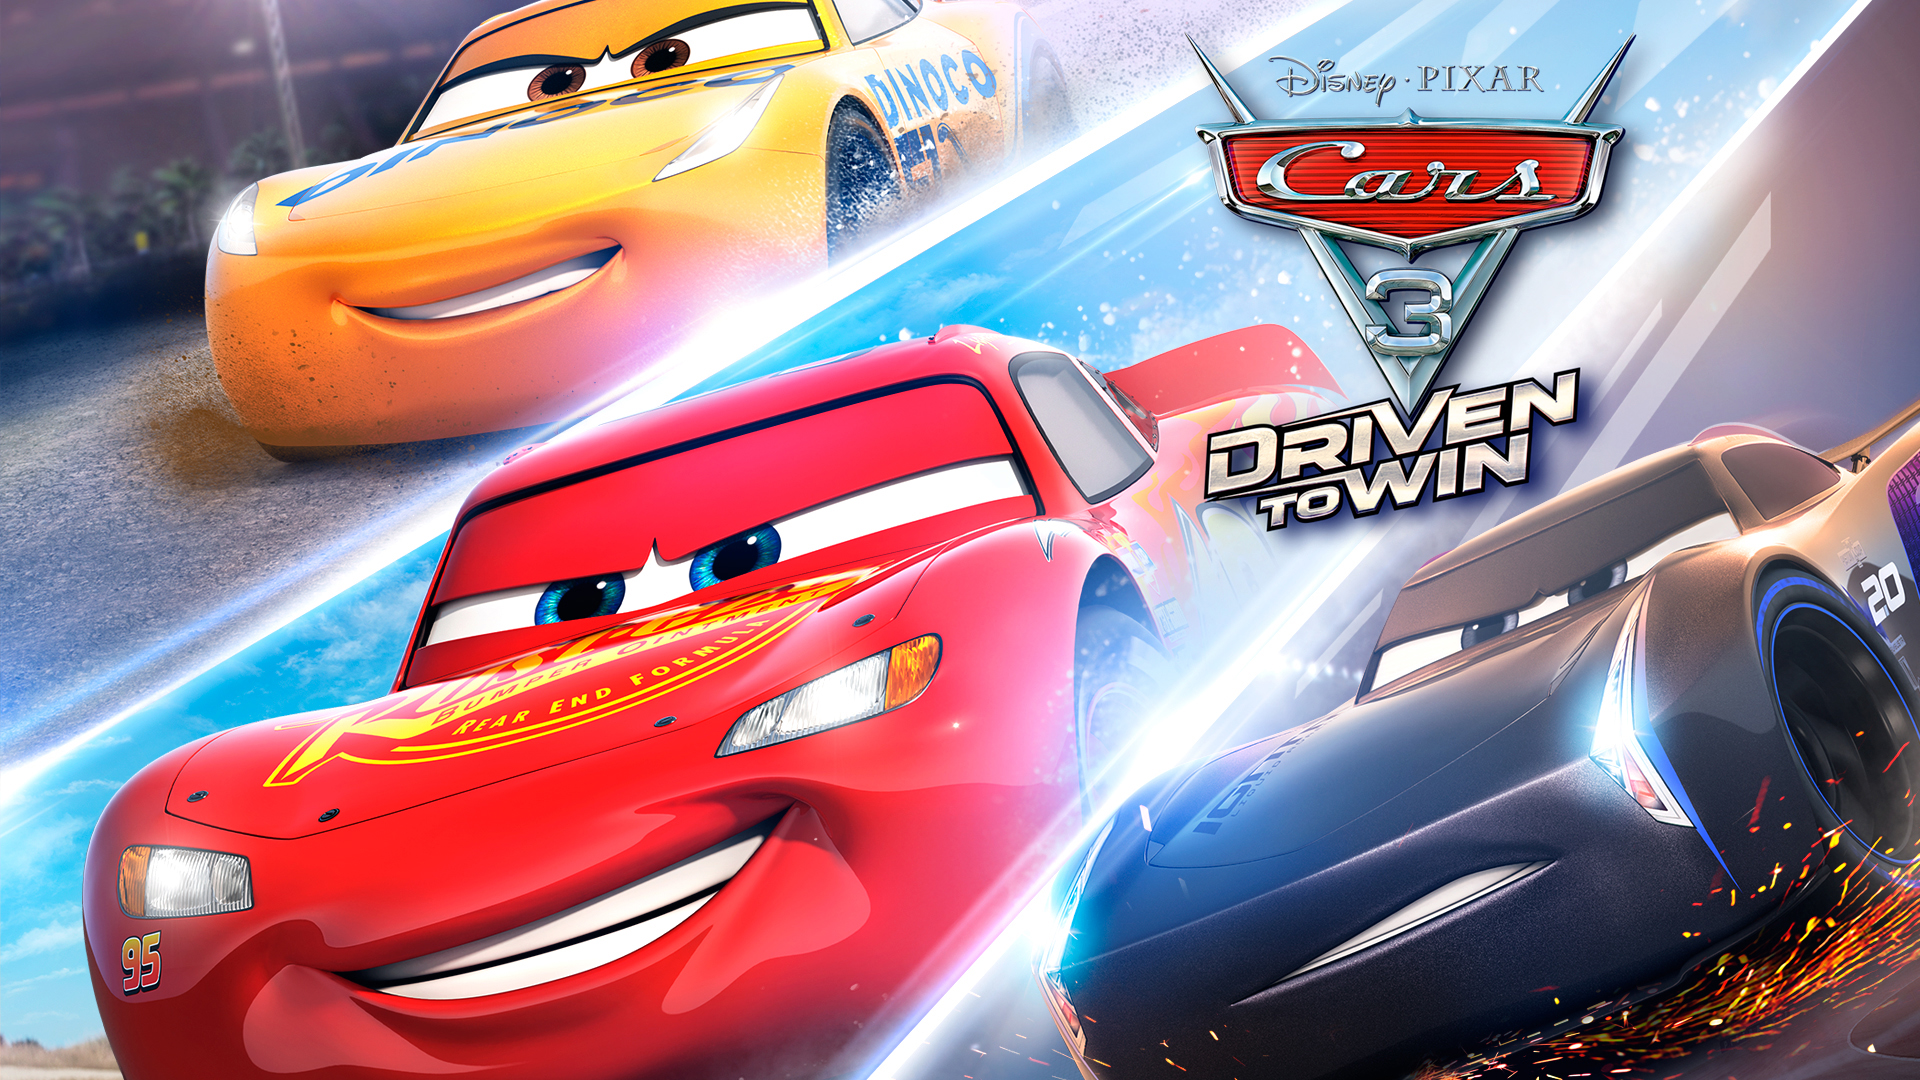 cars-3-driven-to-win-1-73-44-41